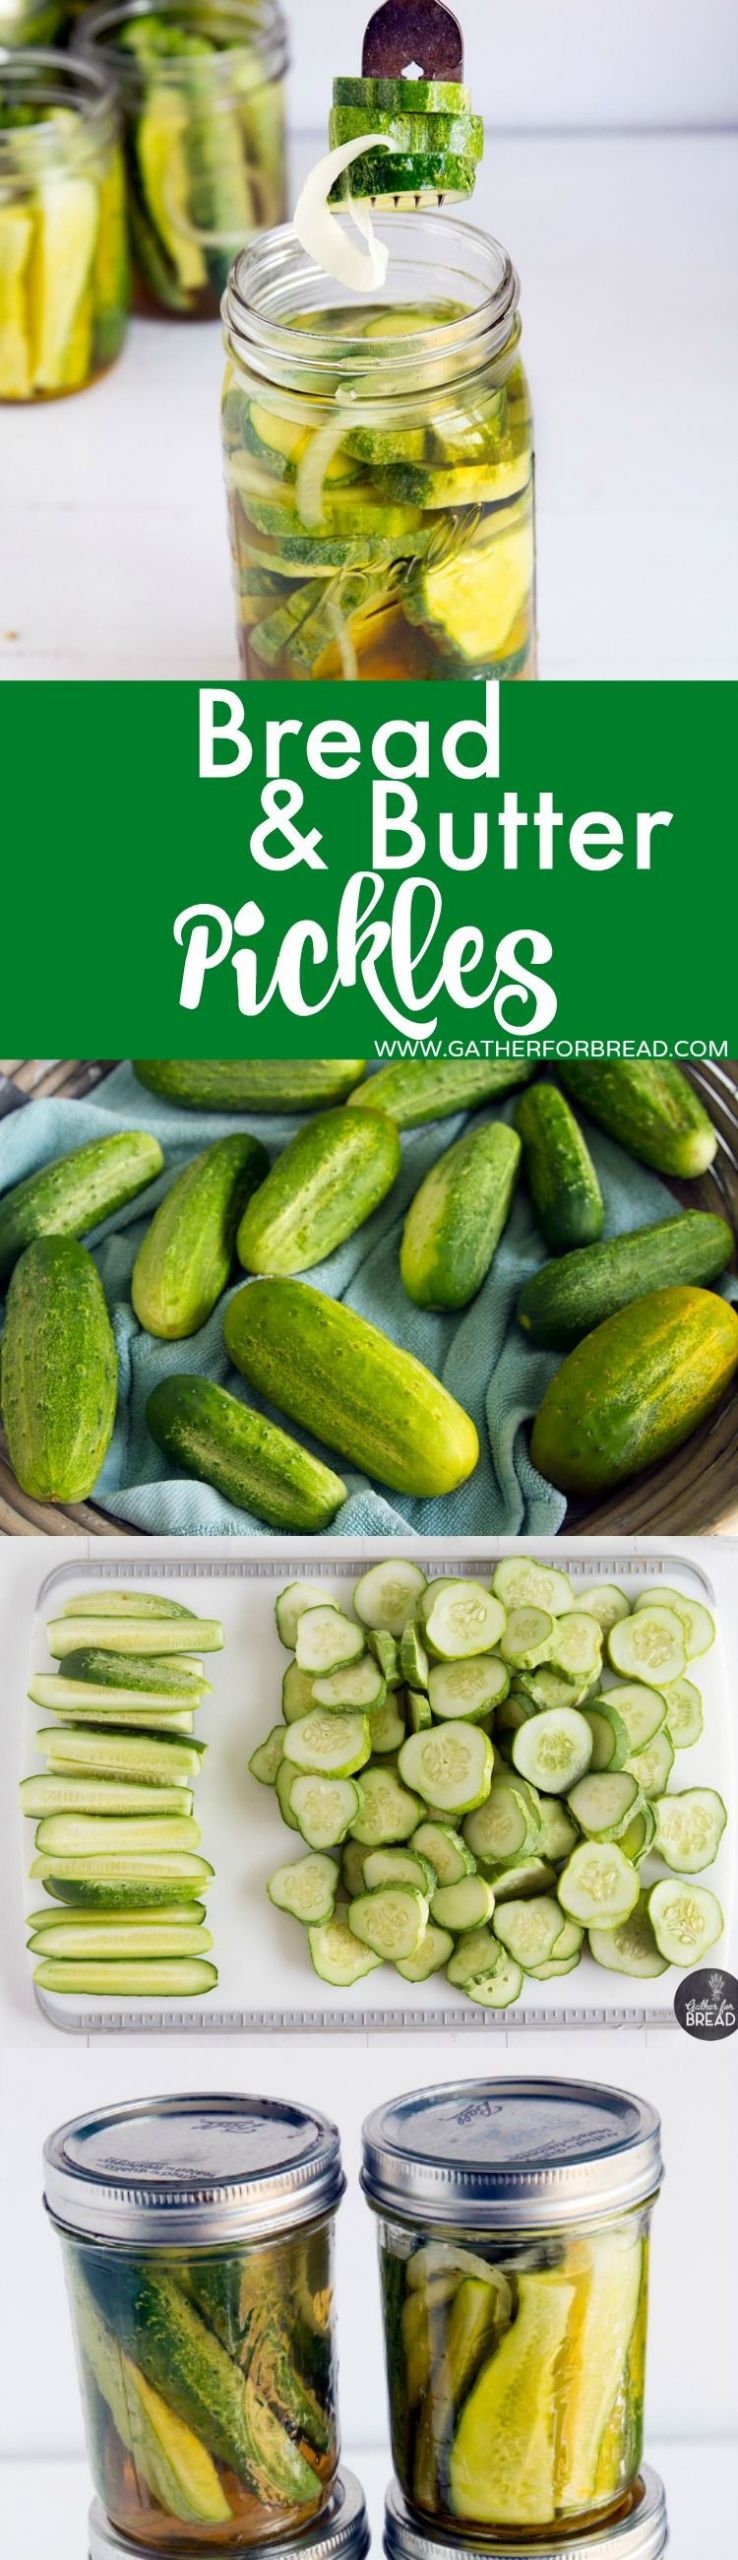 Bread And Butter Pickles Recipe No Canning
 How to Make Bread and Butter Refrigerator Pickles No